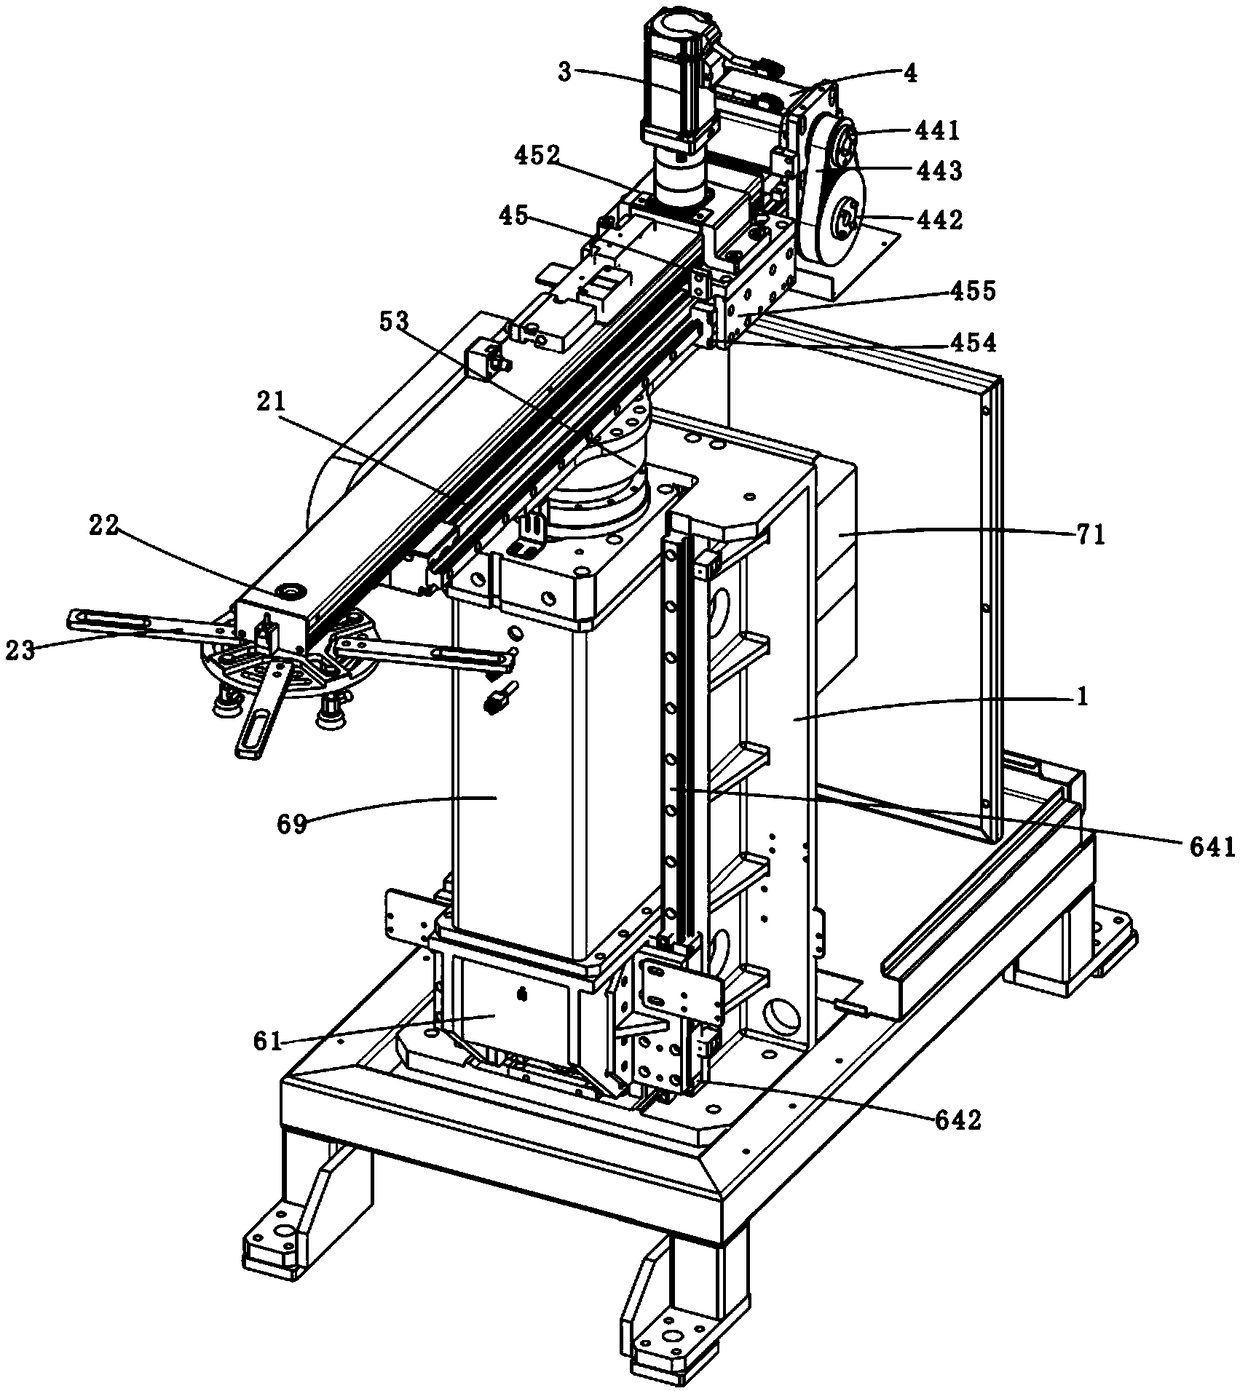 Four-axis stamping manipulator